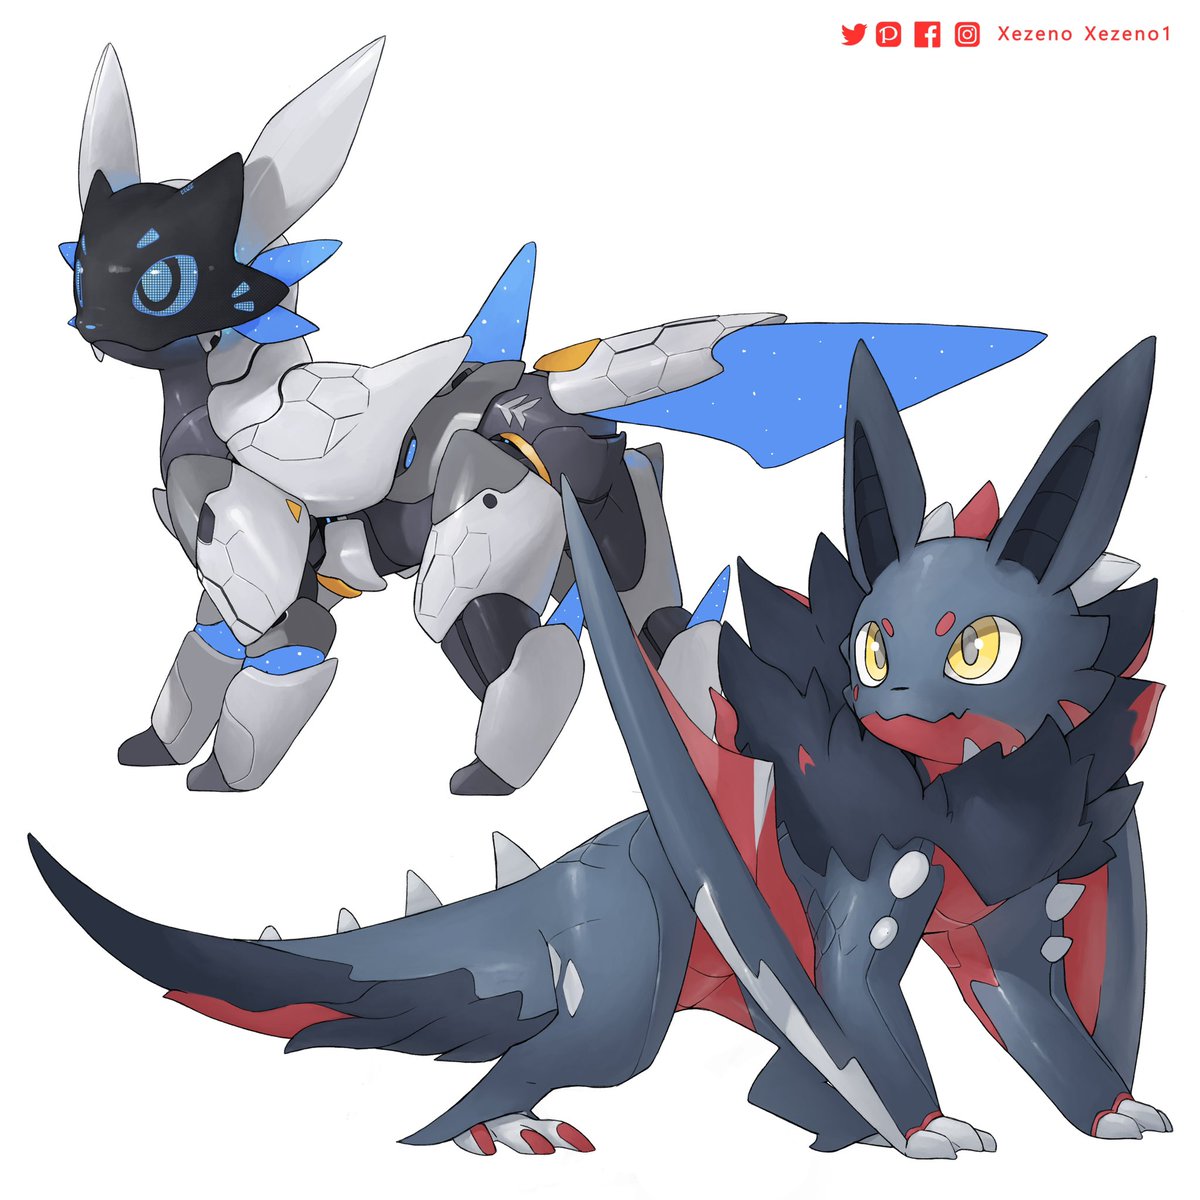 「Steel and dragon type Eevee」|Marcus Hiiのイラスト